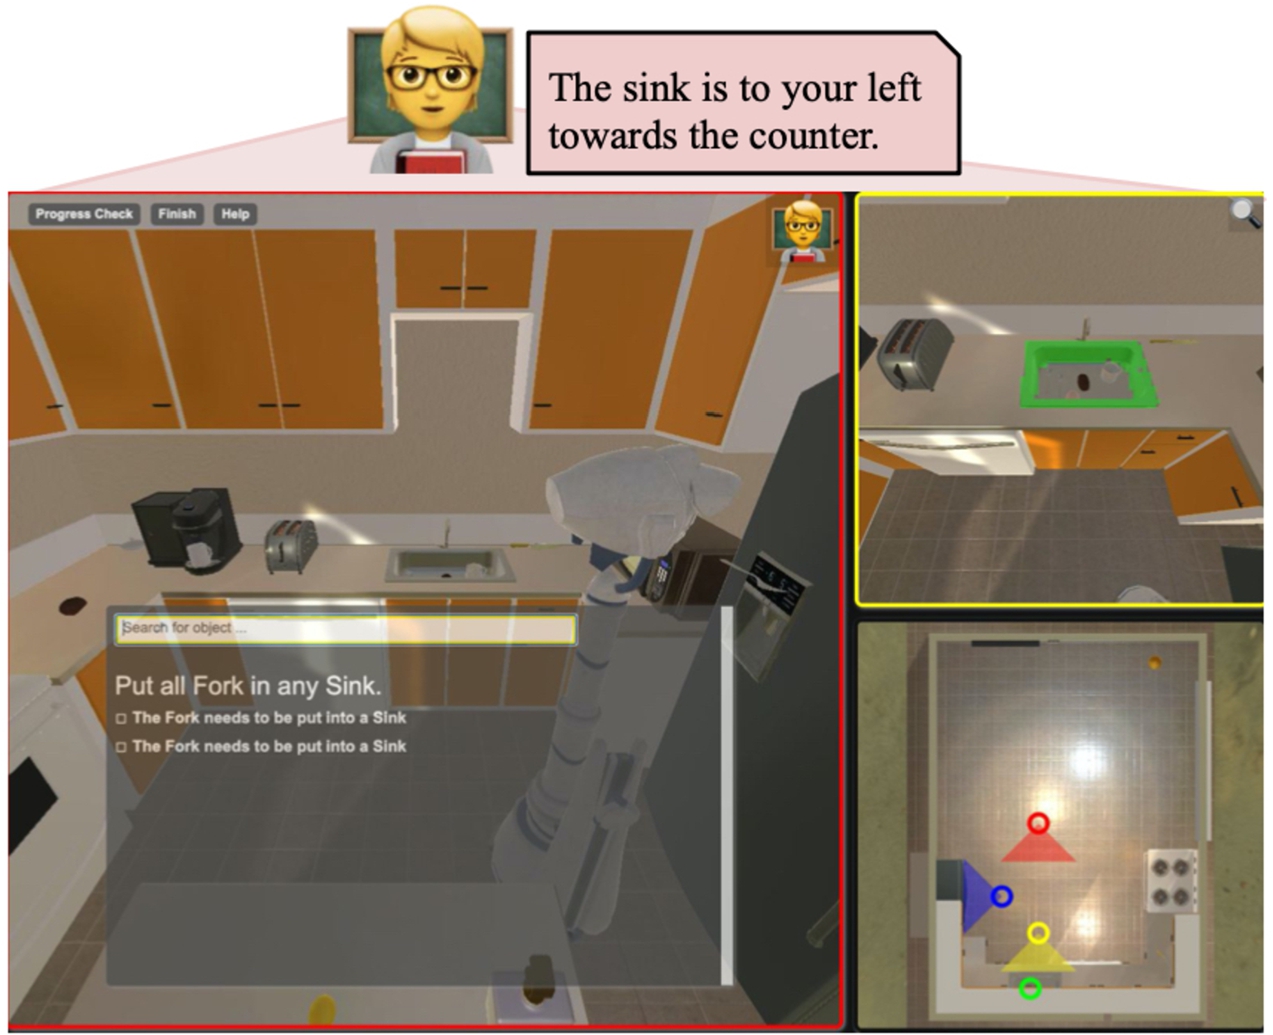 Example of a simulation environment for data collection and evaluation: the SimBot challenge using the TEACh dataset, from [47]. An Instructor (top) guides a Follower (with egocentric perspective in the main window) in a realistic 3D home environment to complete tasks such as “put all the forks in the sink”. Our EMMA system competes in this challenge [63].